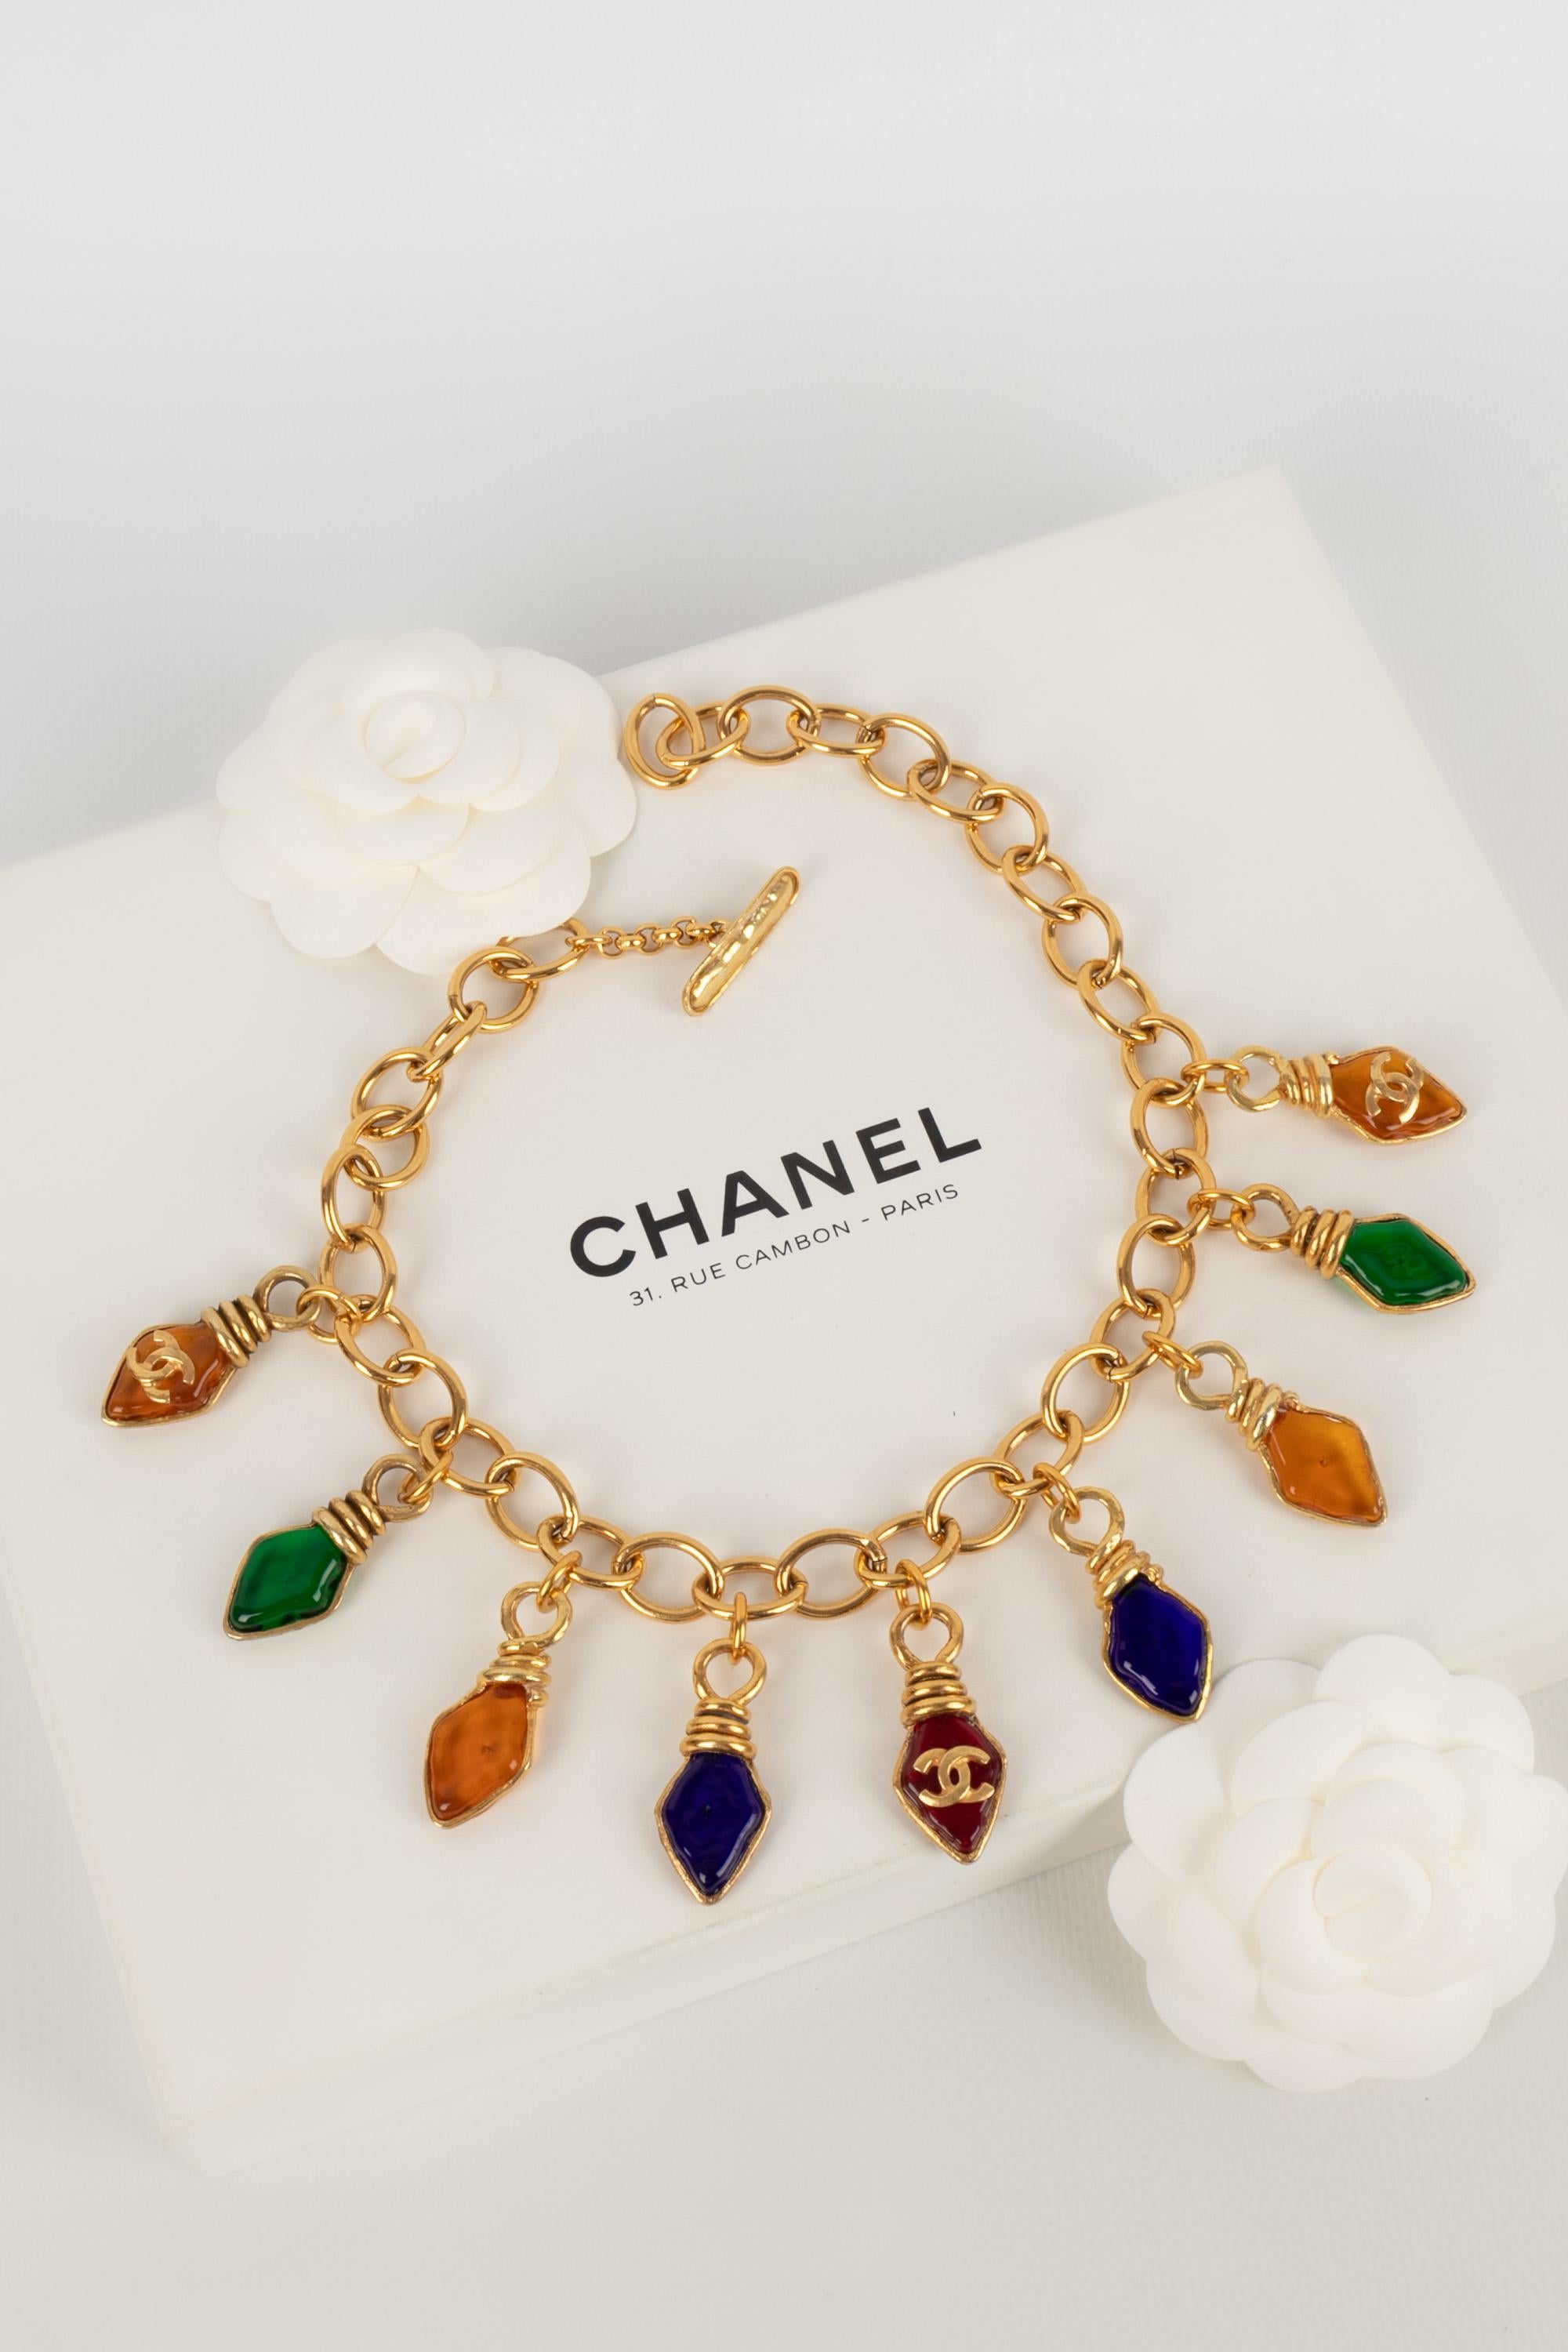 CHANEL - (Made in France) Golden metal short necklace with glass paste charms. 1995 Spring-Summer Ready-to-Wear Collection designed under the artistic direction of Karl Lagerfeld.

Condition:
Very good condition

Dimensions:
Length: about 44